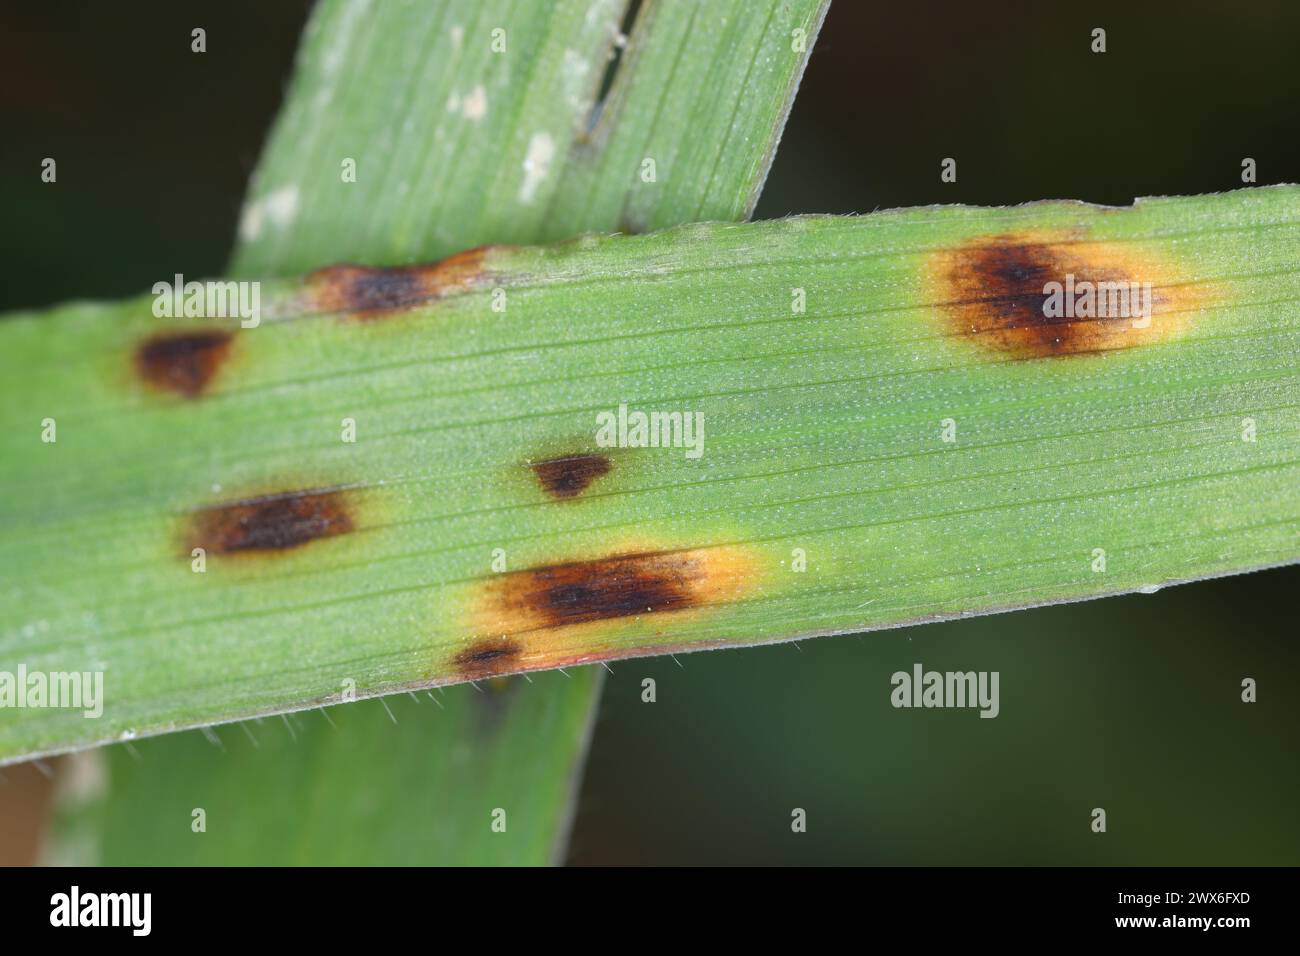 Symptoms of disease caused by pathogenic fungi on cereal leaves. Stock Photo